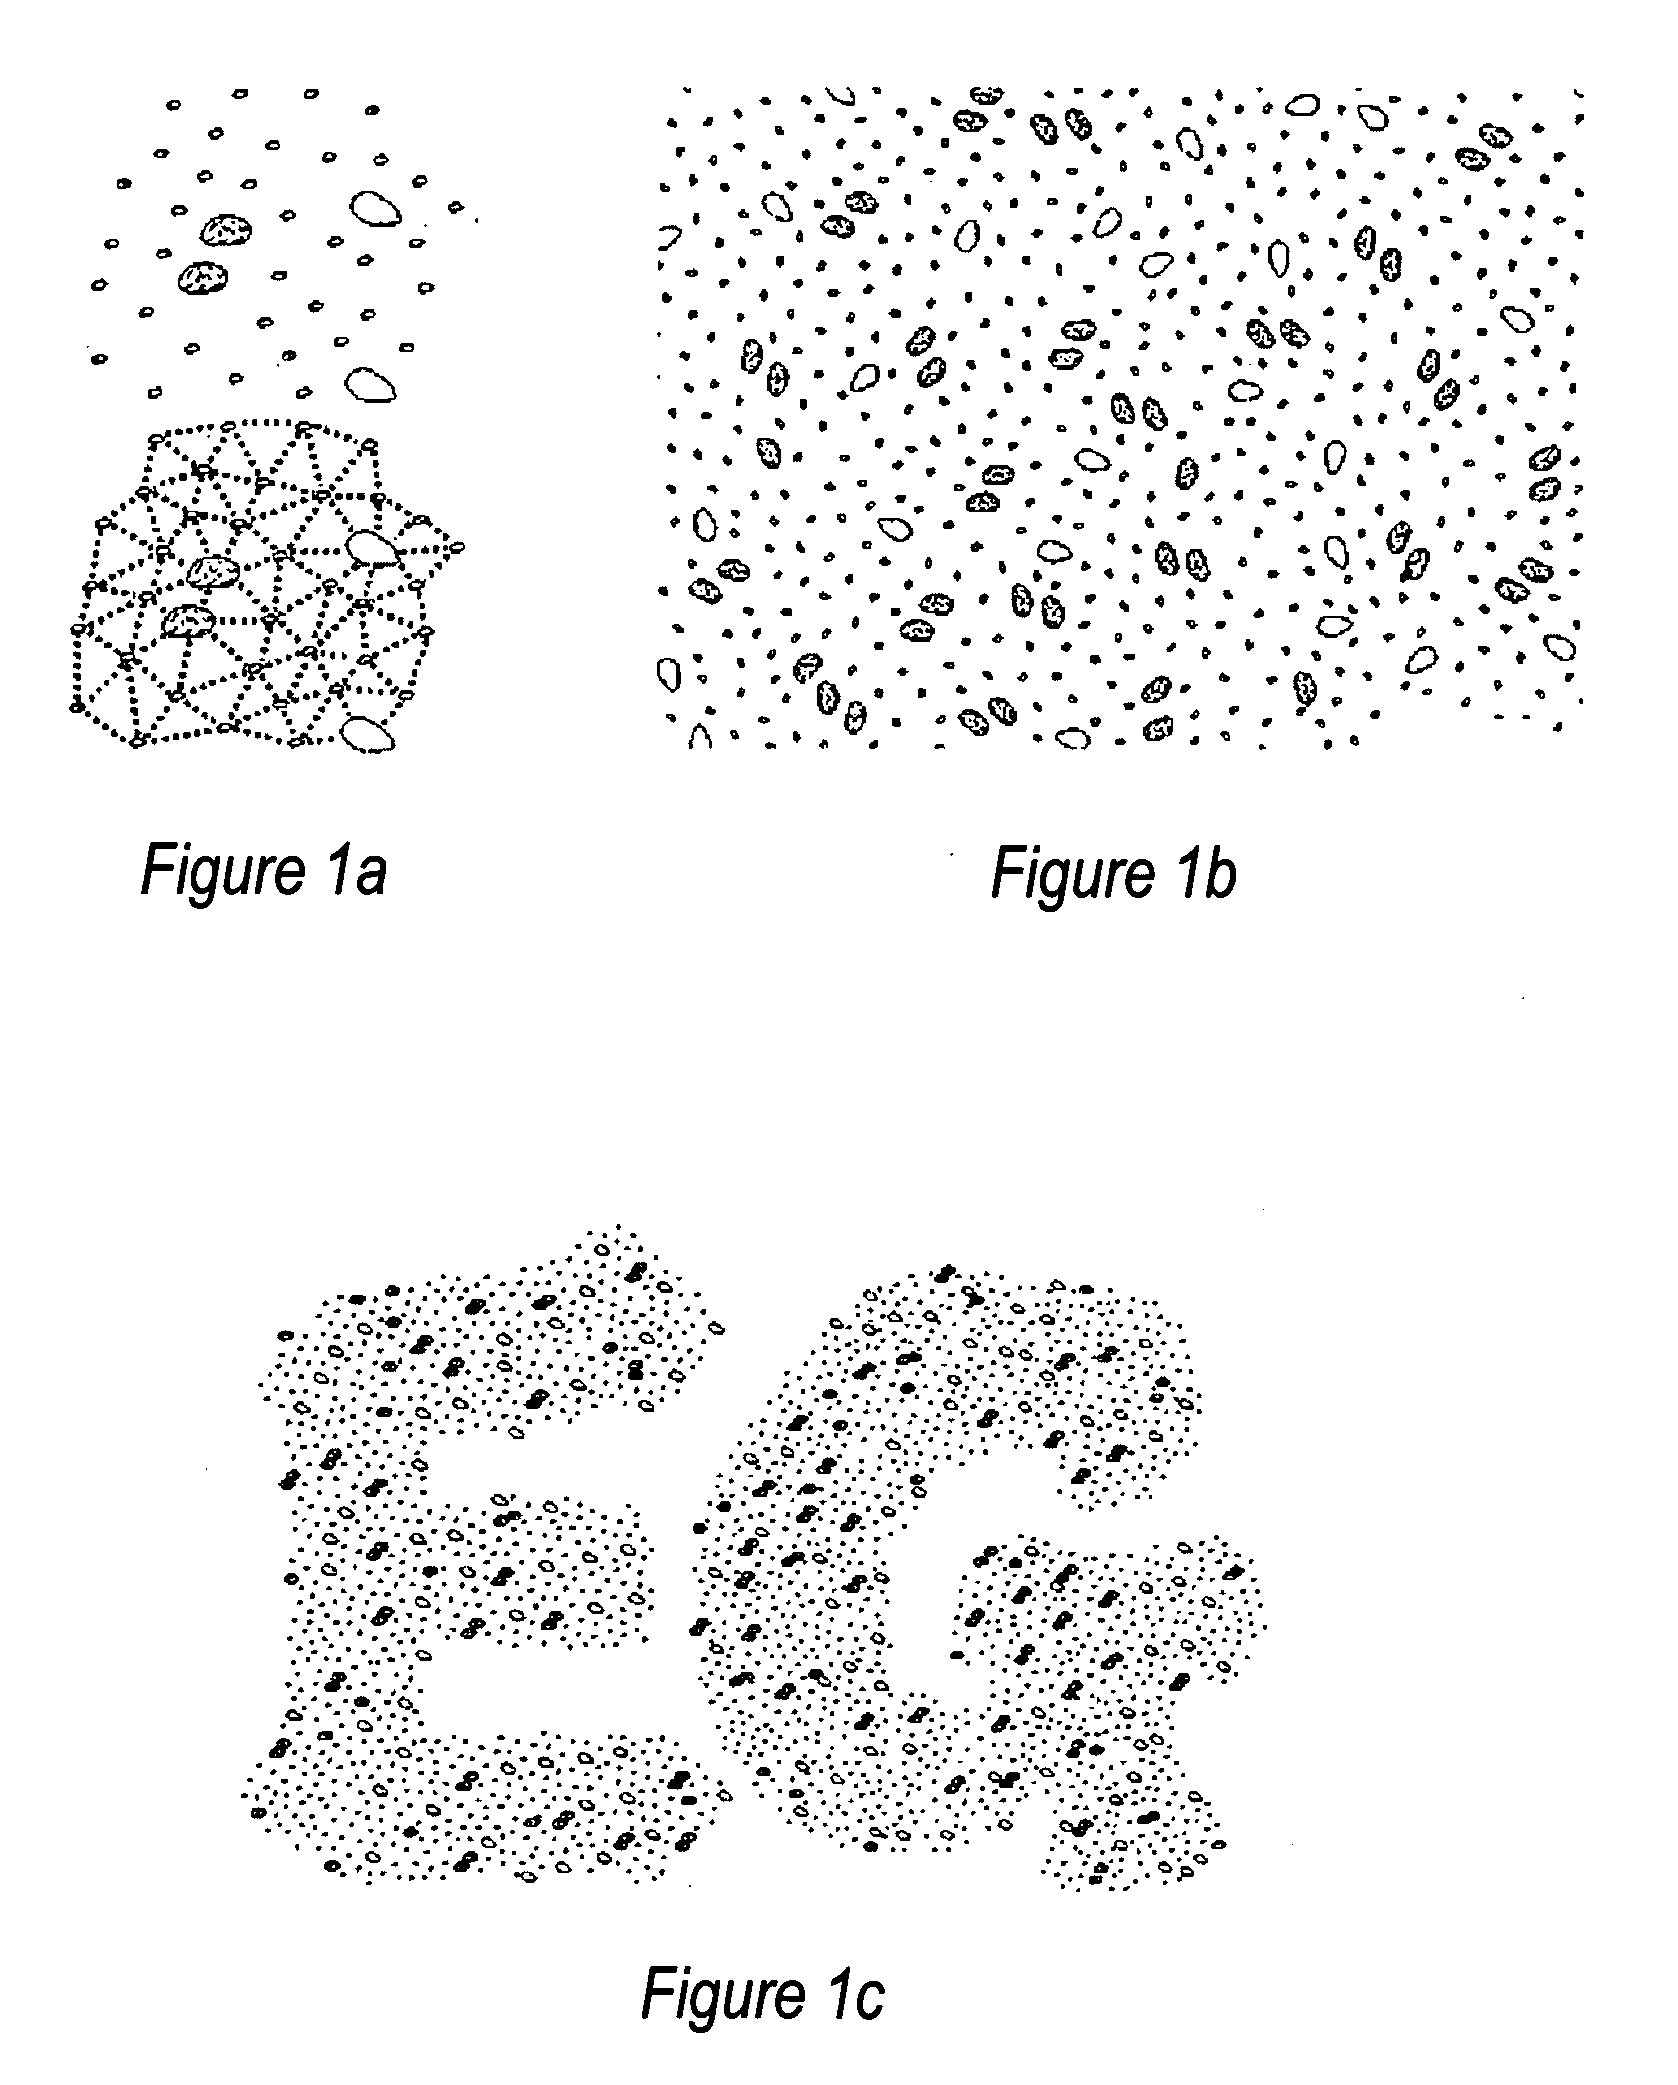 Example-Based Procedural Synthesis of Element Arrangements